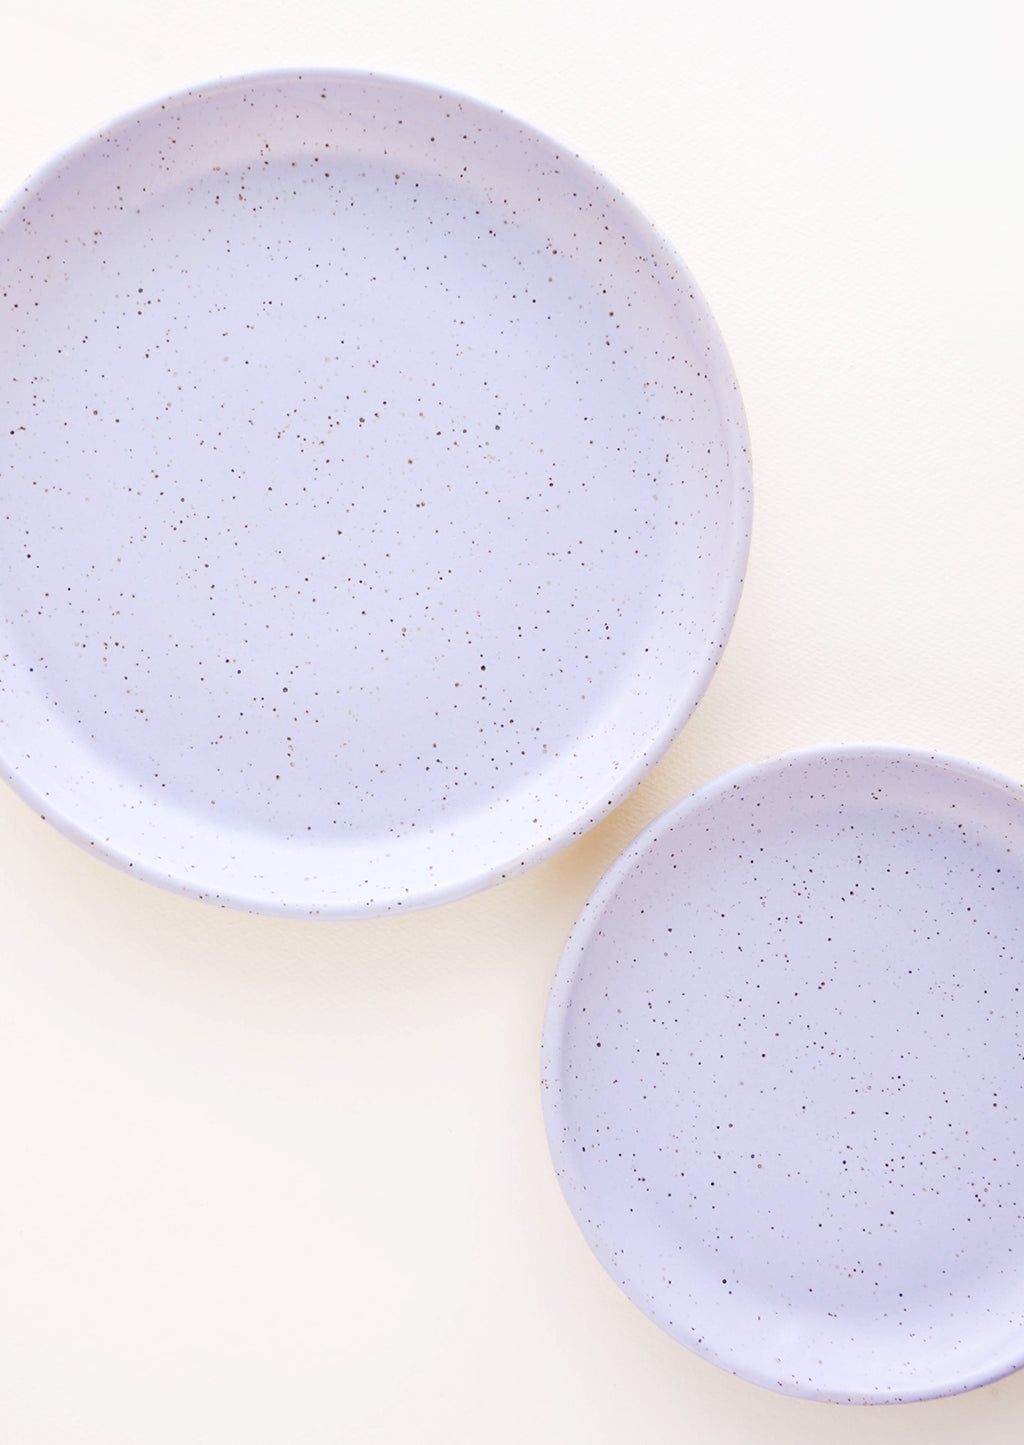 Wisteria / Salad Plate: A pair of Lavender Colored Speckled Ceramic Salad & Dinner Plates.